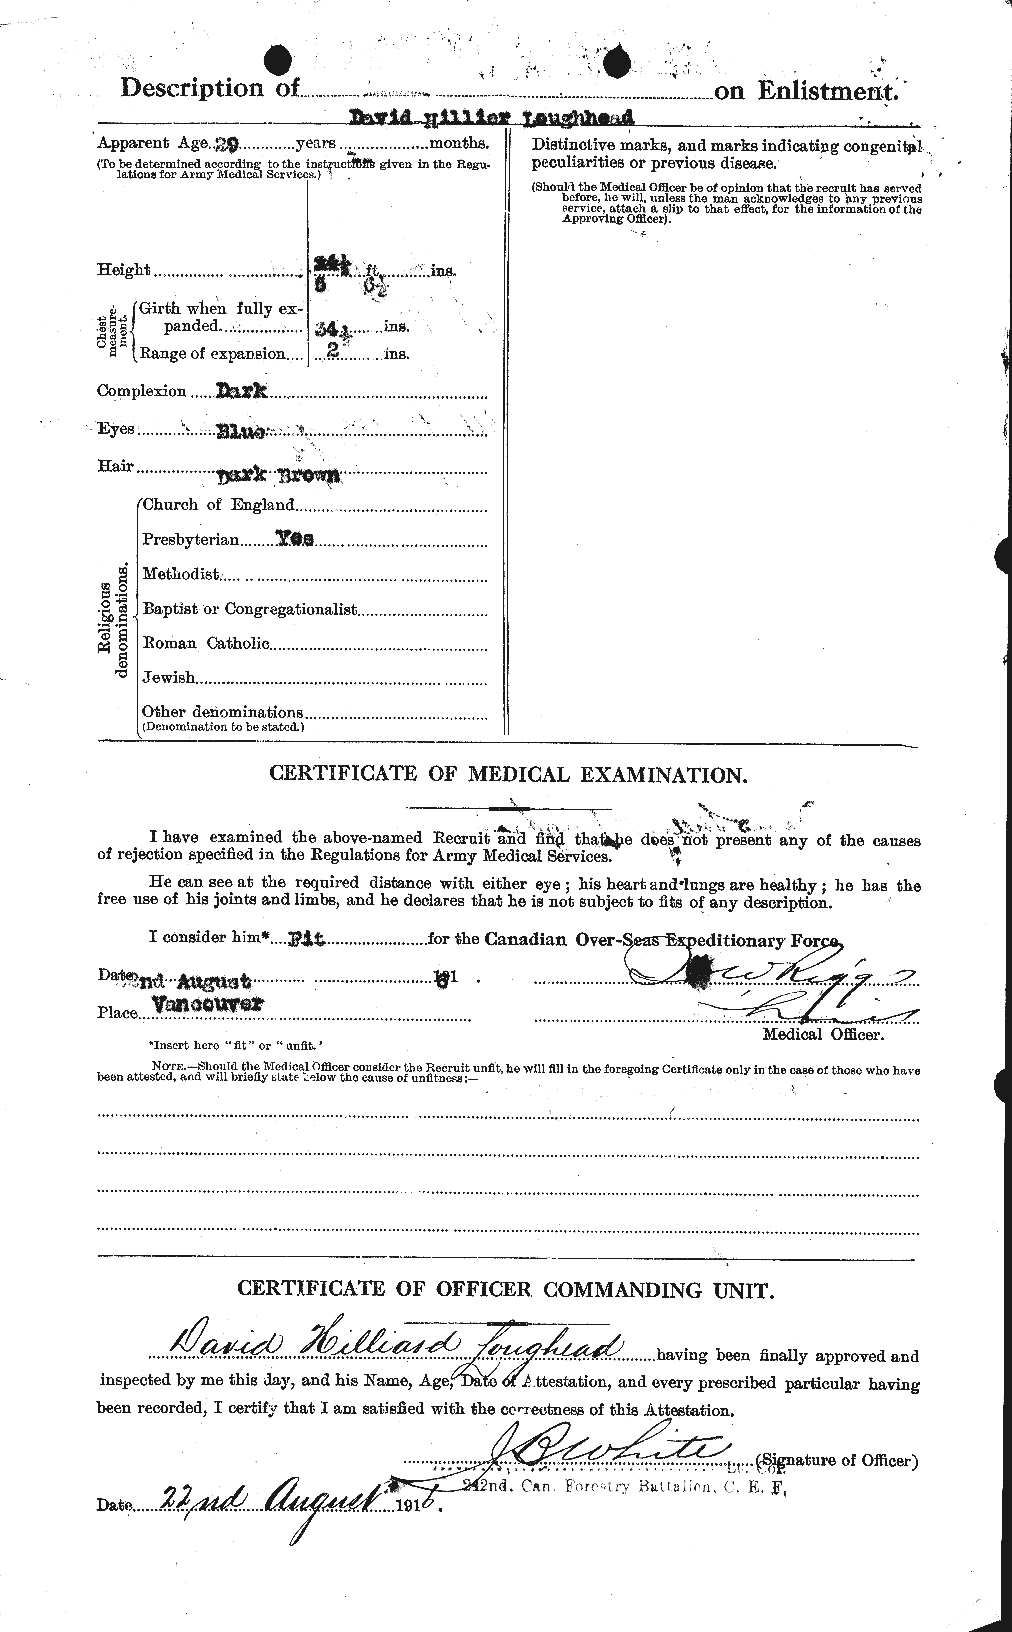 Personnel Records of the First World War - CEF 470390b